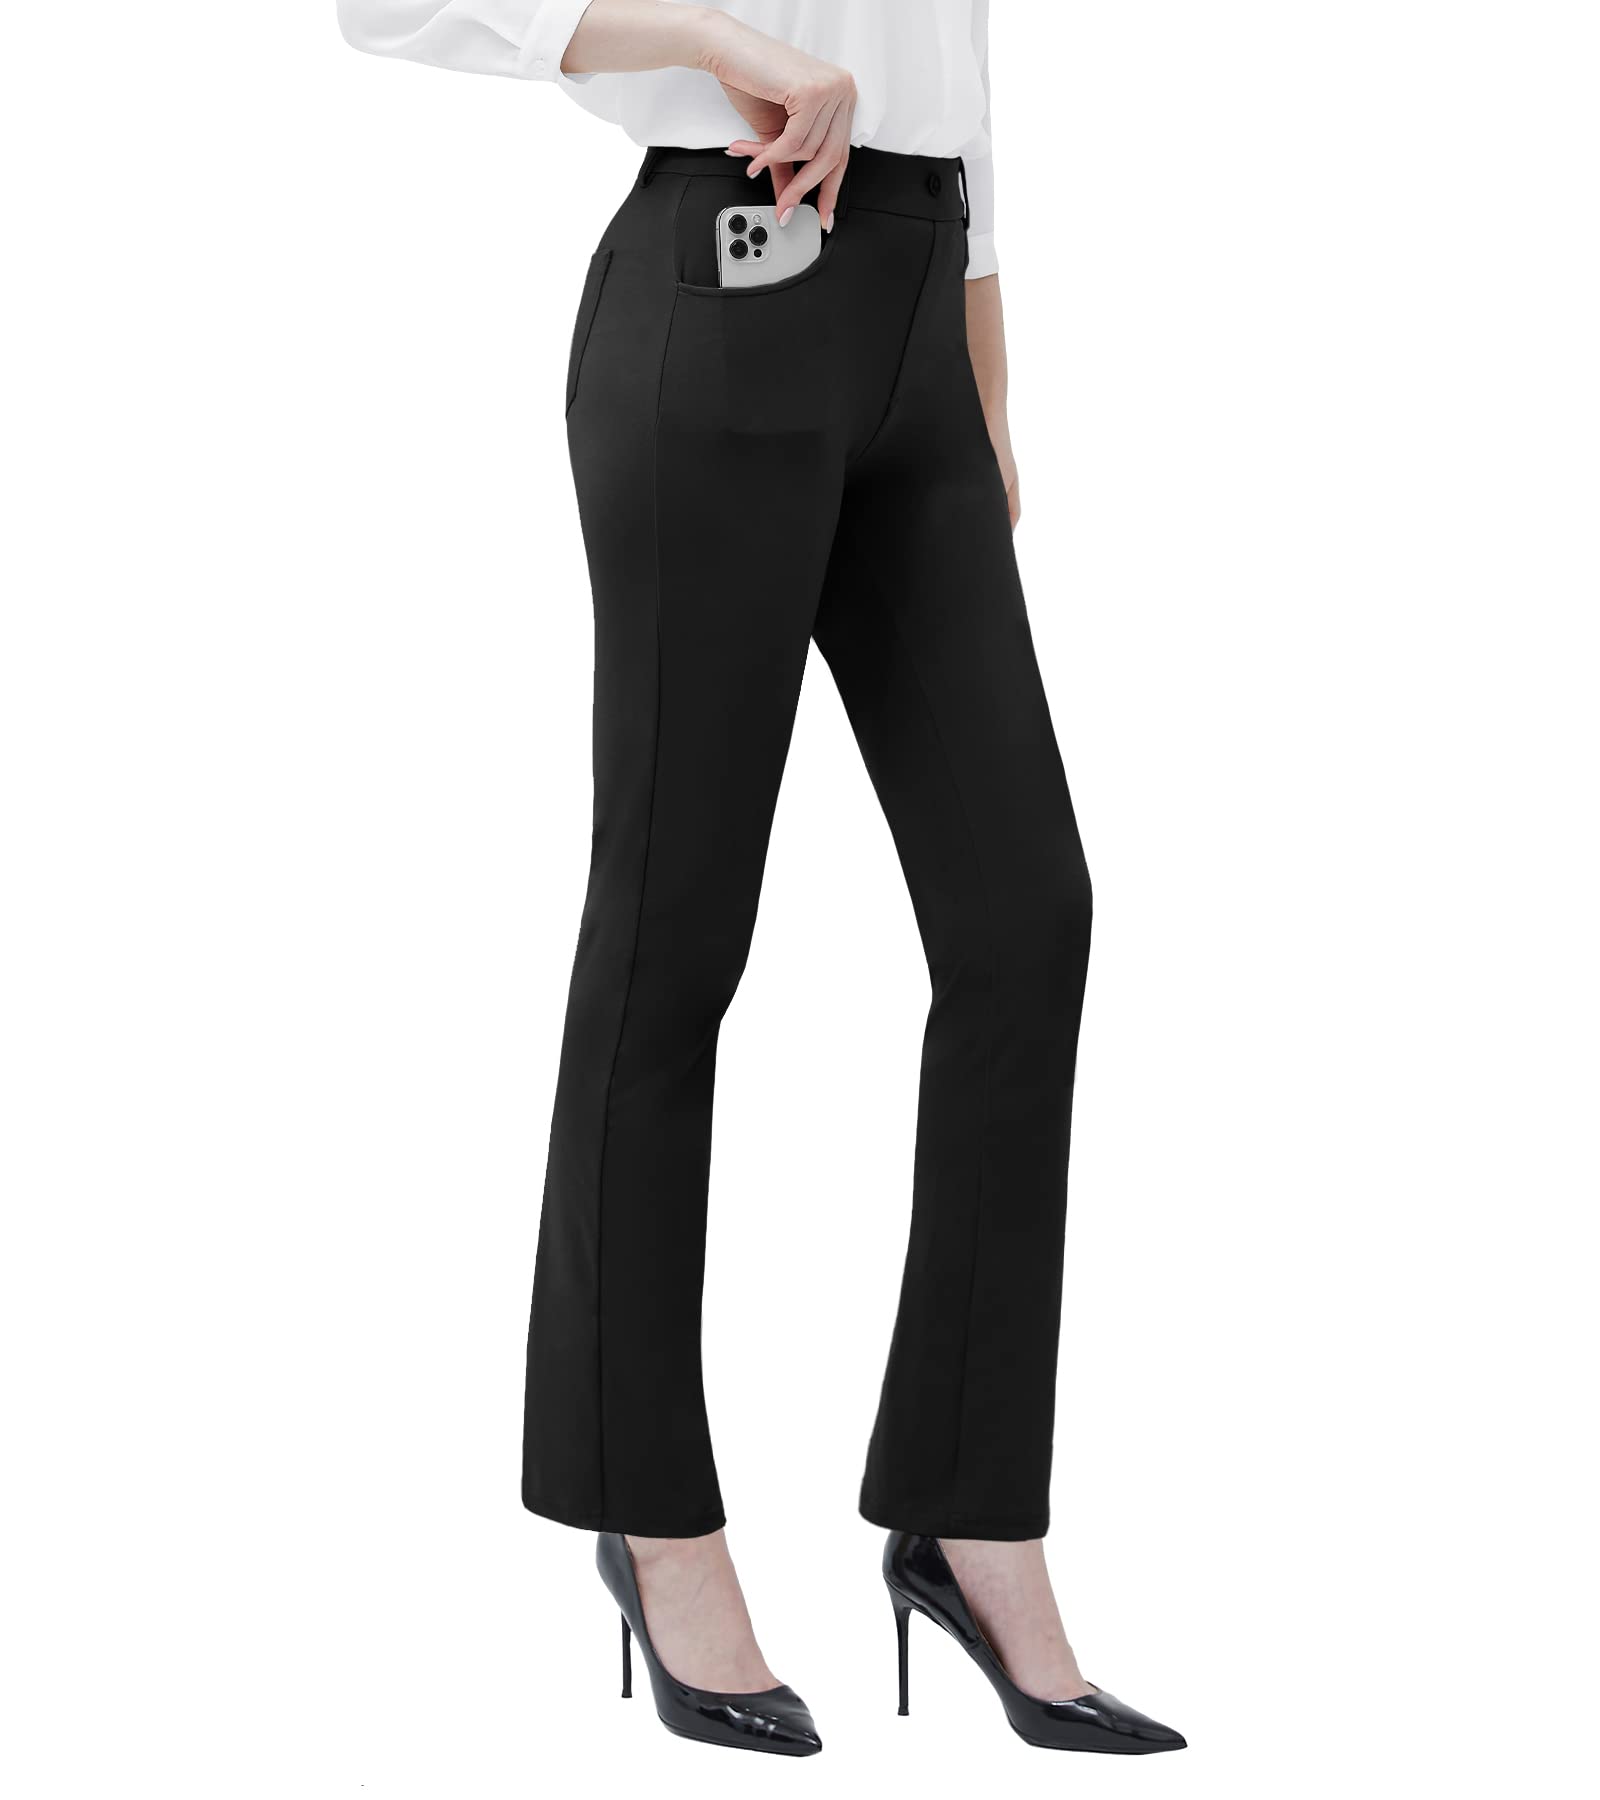 Thapower Women's Yoga Dress Pants Stretch Business Casual Work